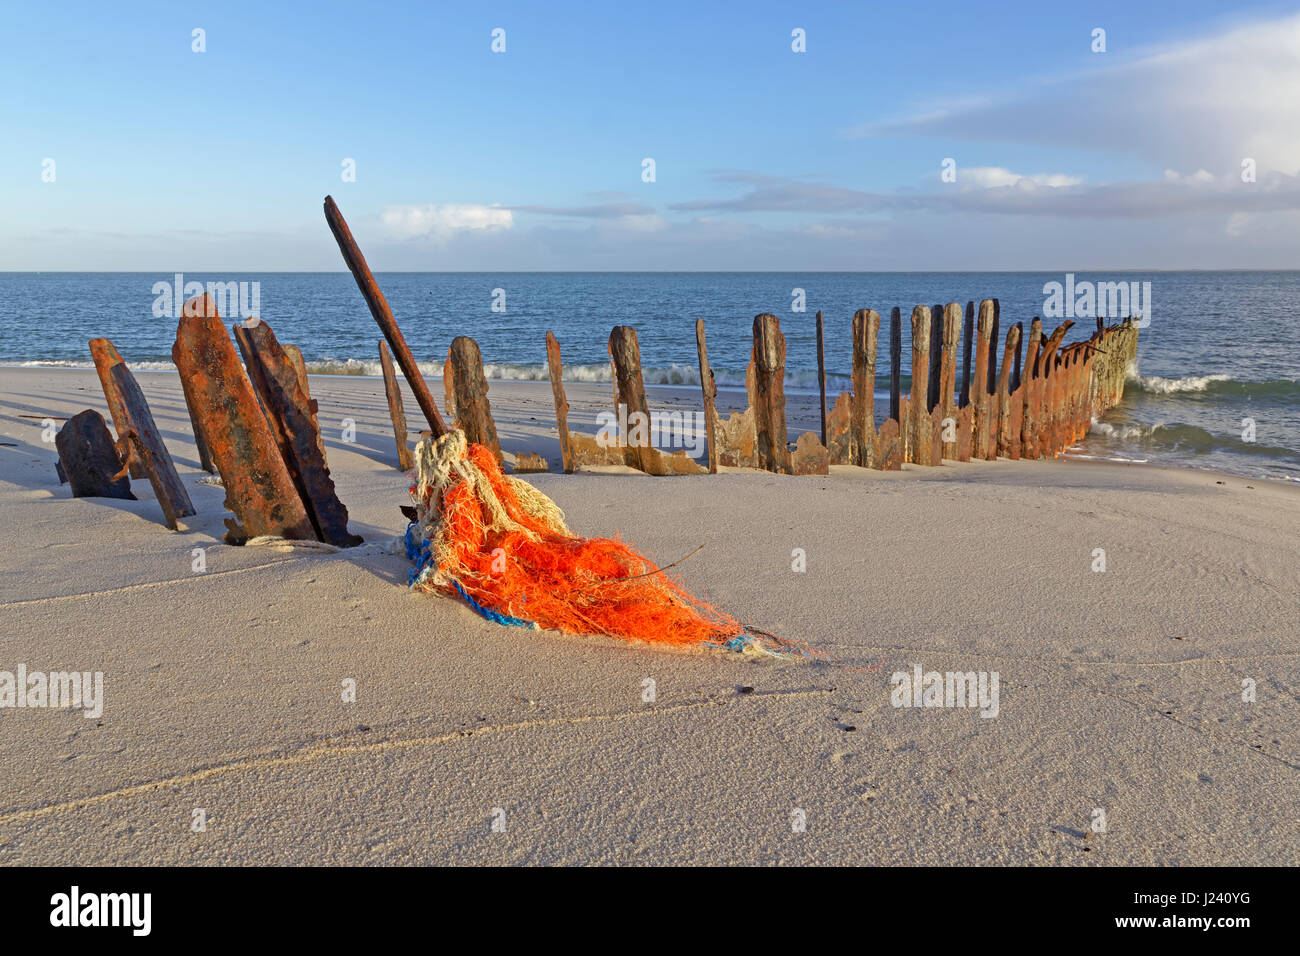 Groin at West beach, Island Sylt, North Sea, Schleswig-Holstein, Germany Stock Photo